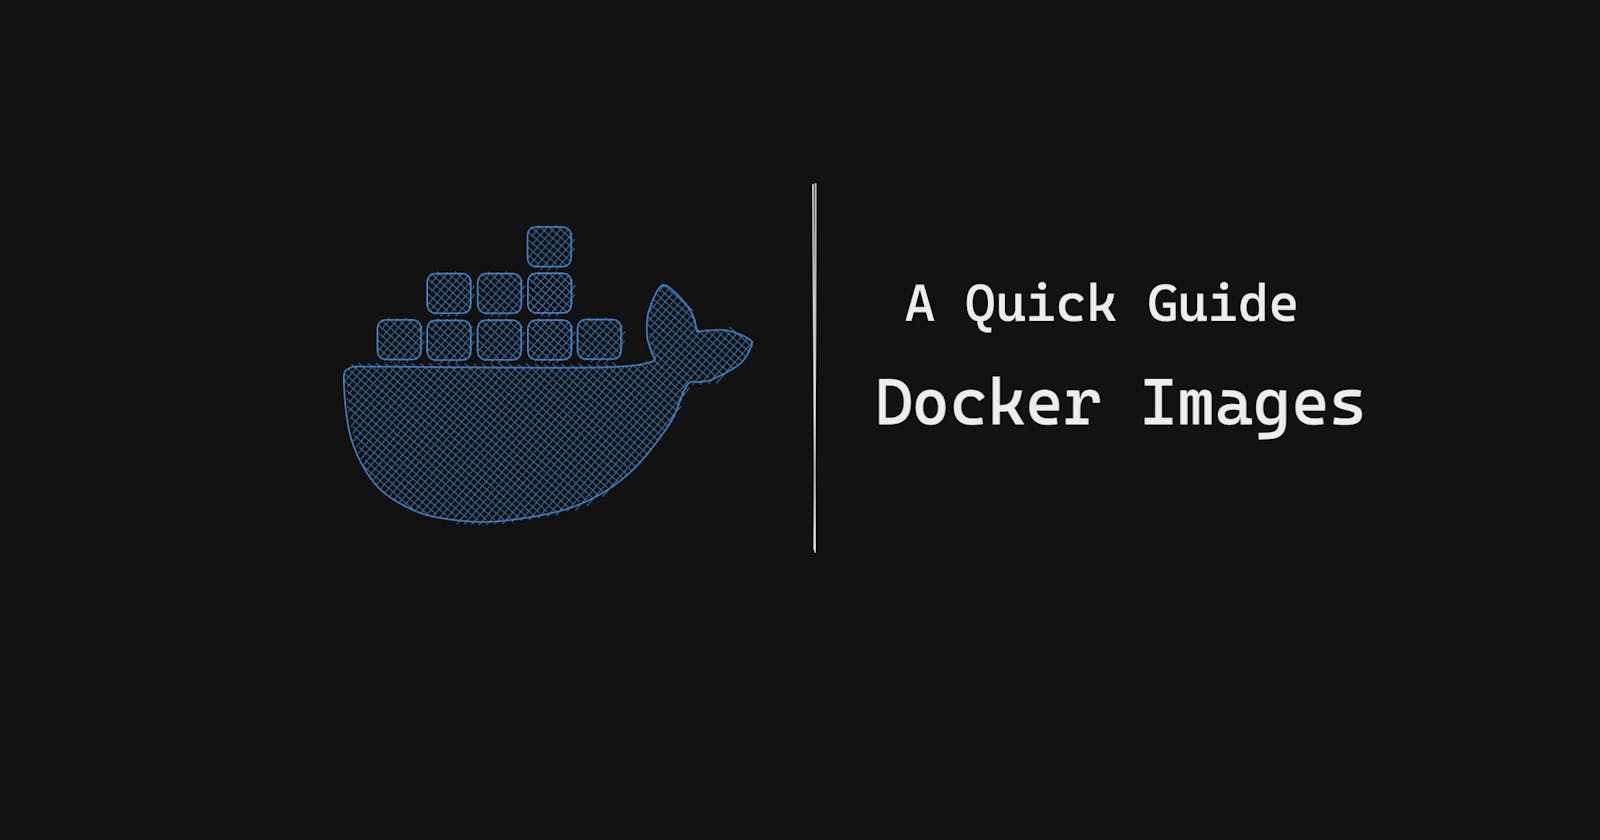 Docker Images: A Quick Guide